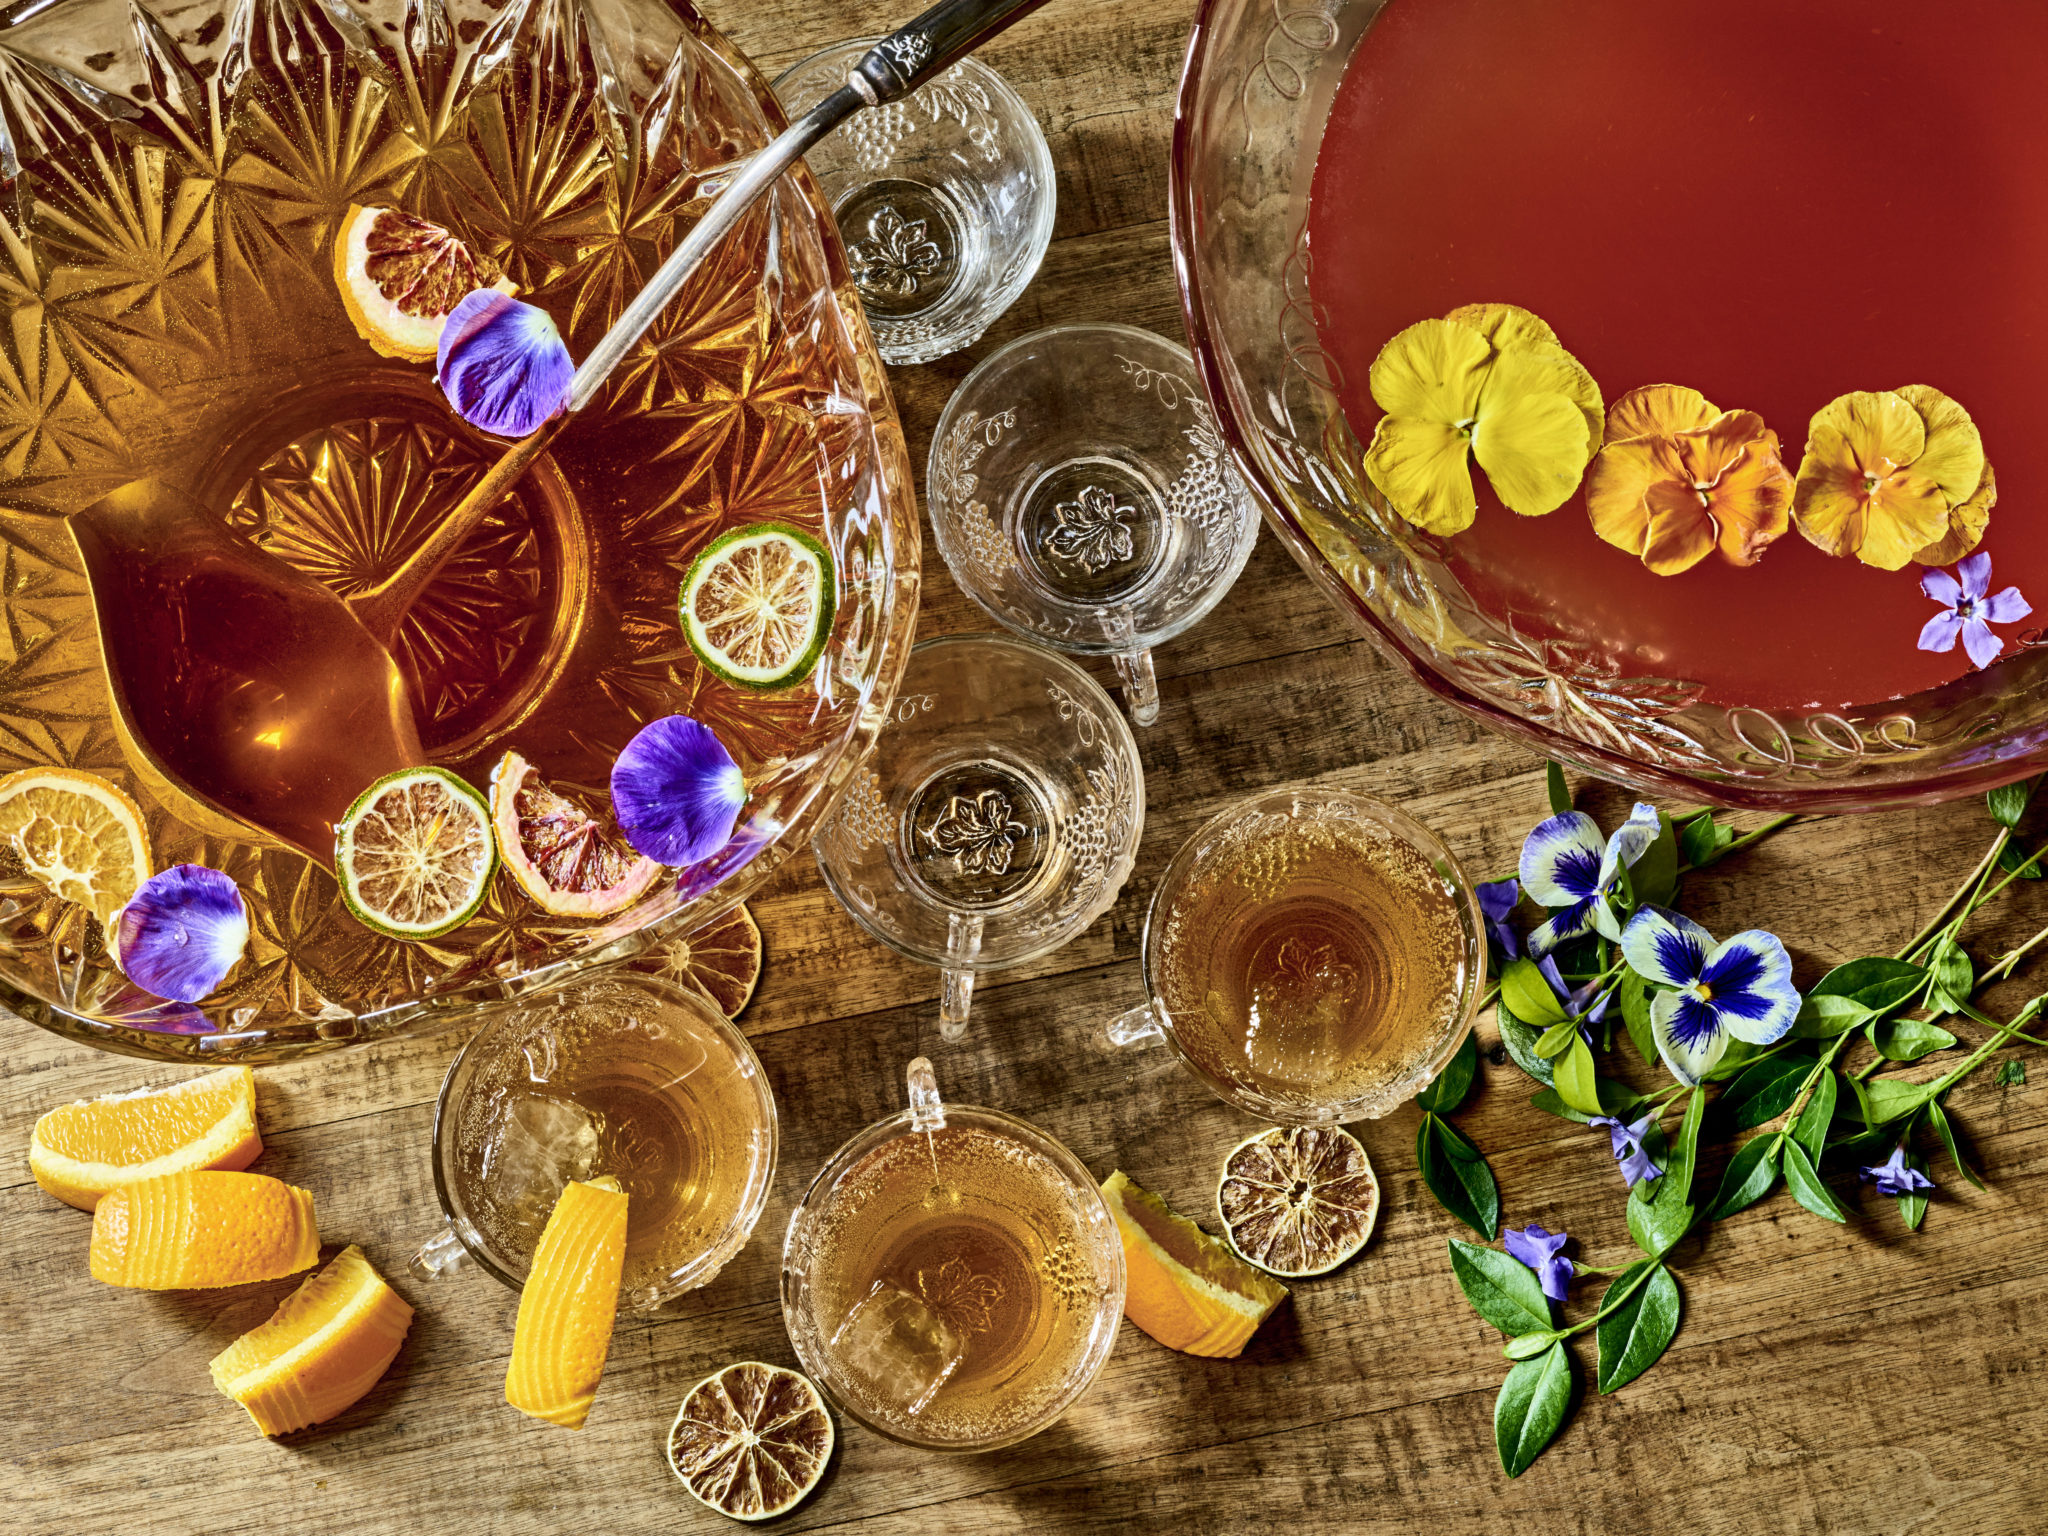 A Punch Bowl To Get Any Party Started